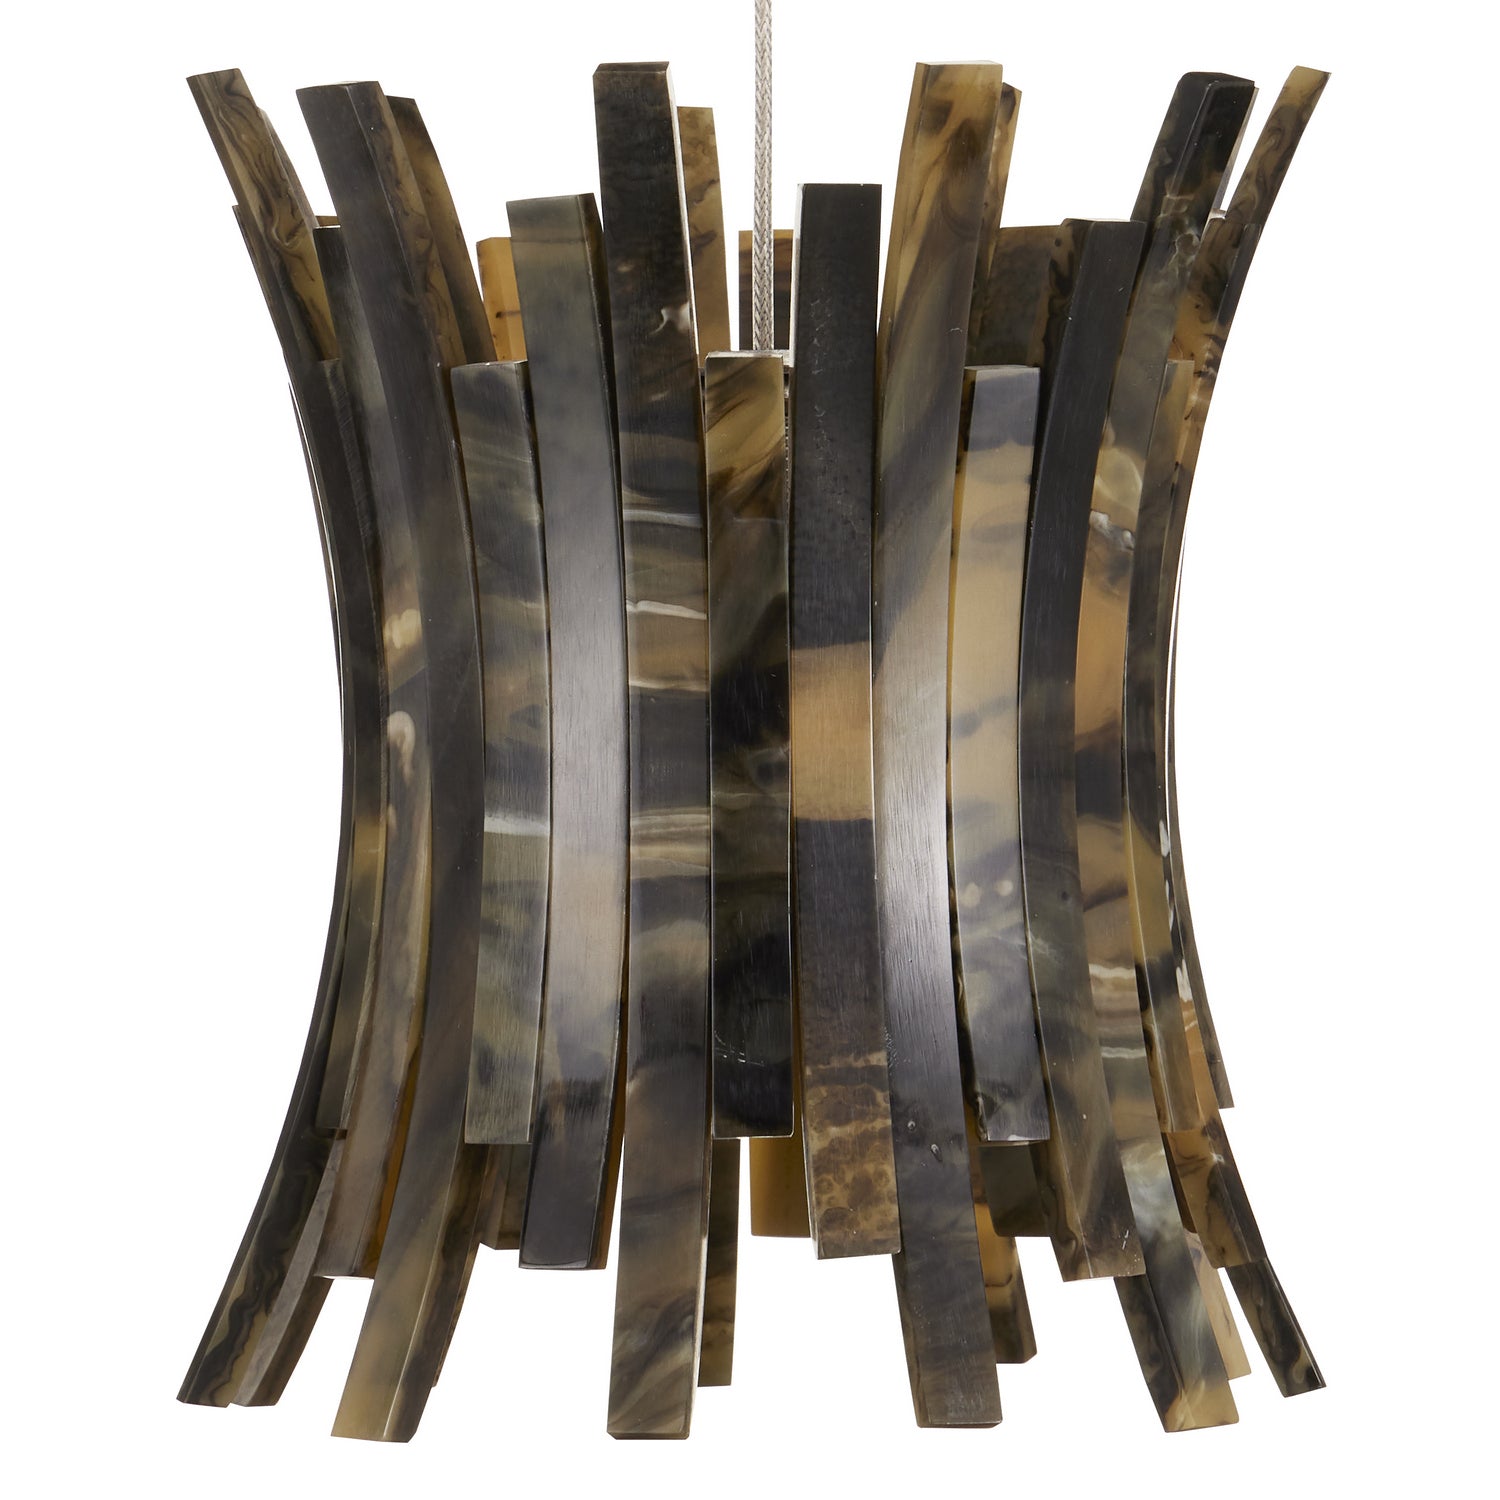 15 Light Pendant from the Alsop collection in Brown/Black/Silver finish